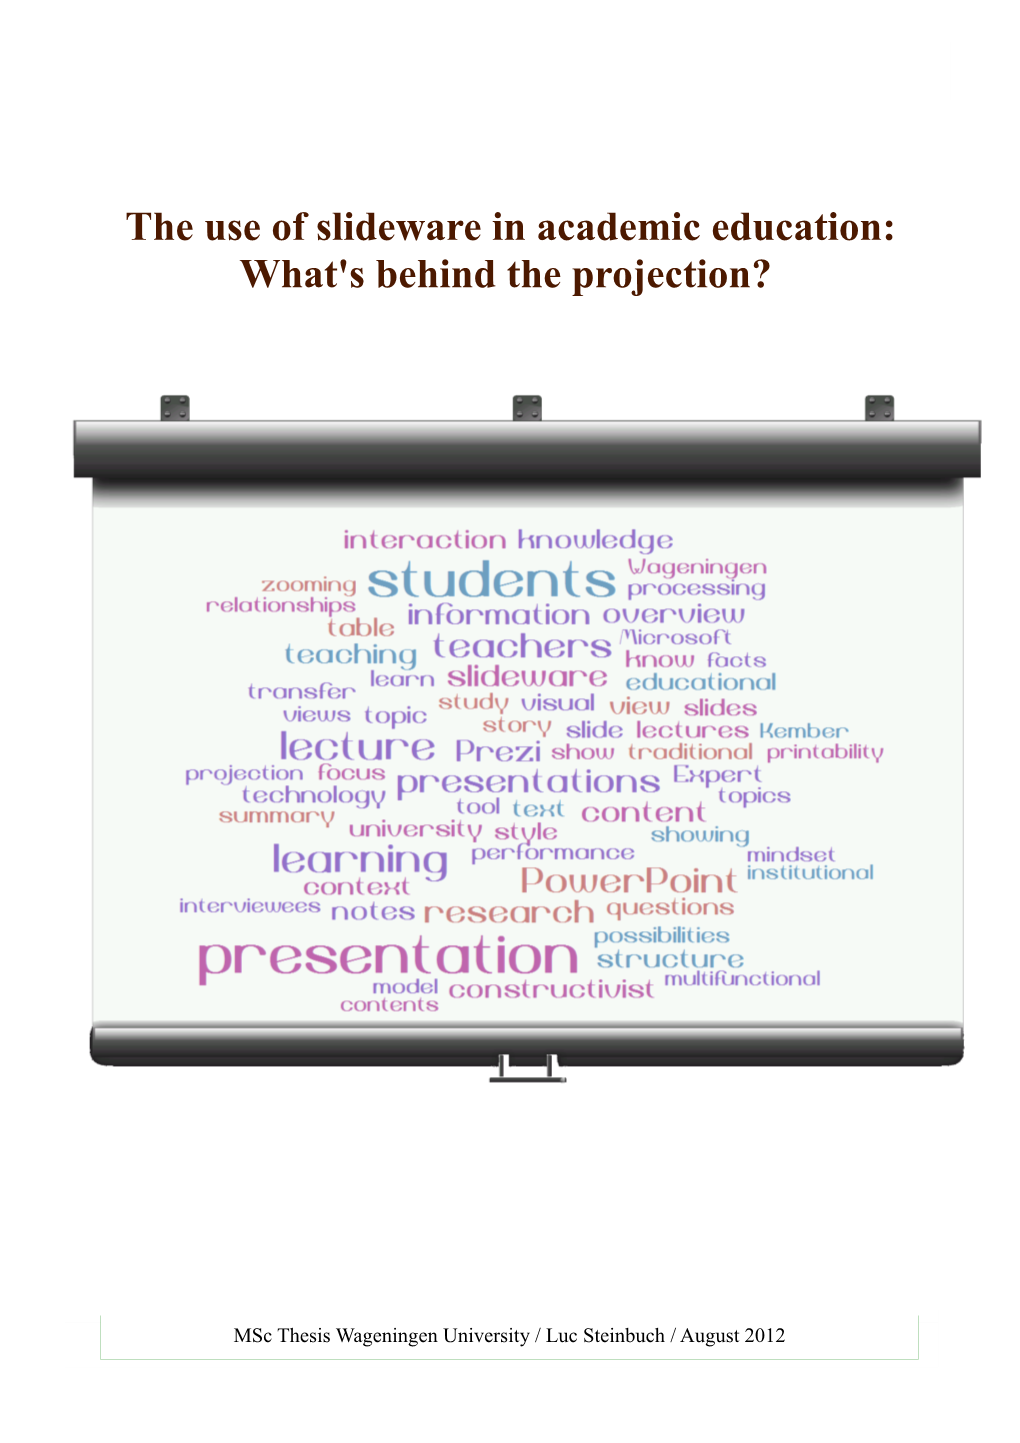 The Use of Slideware in Academic Education: What's Behind the Projection?